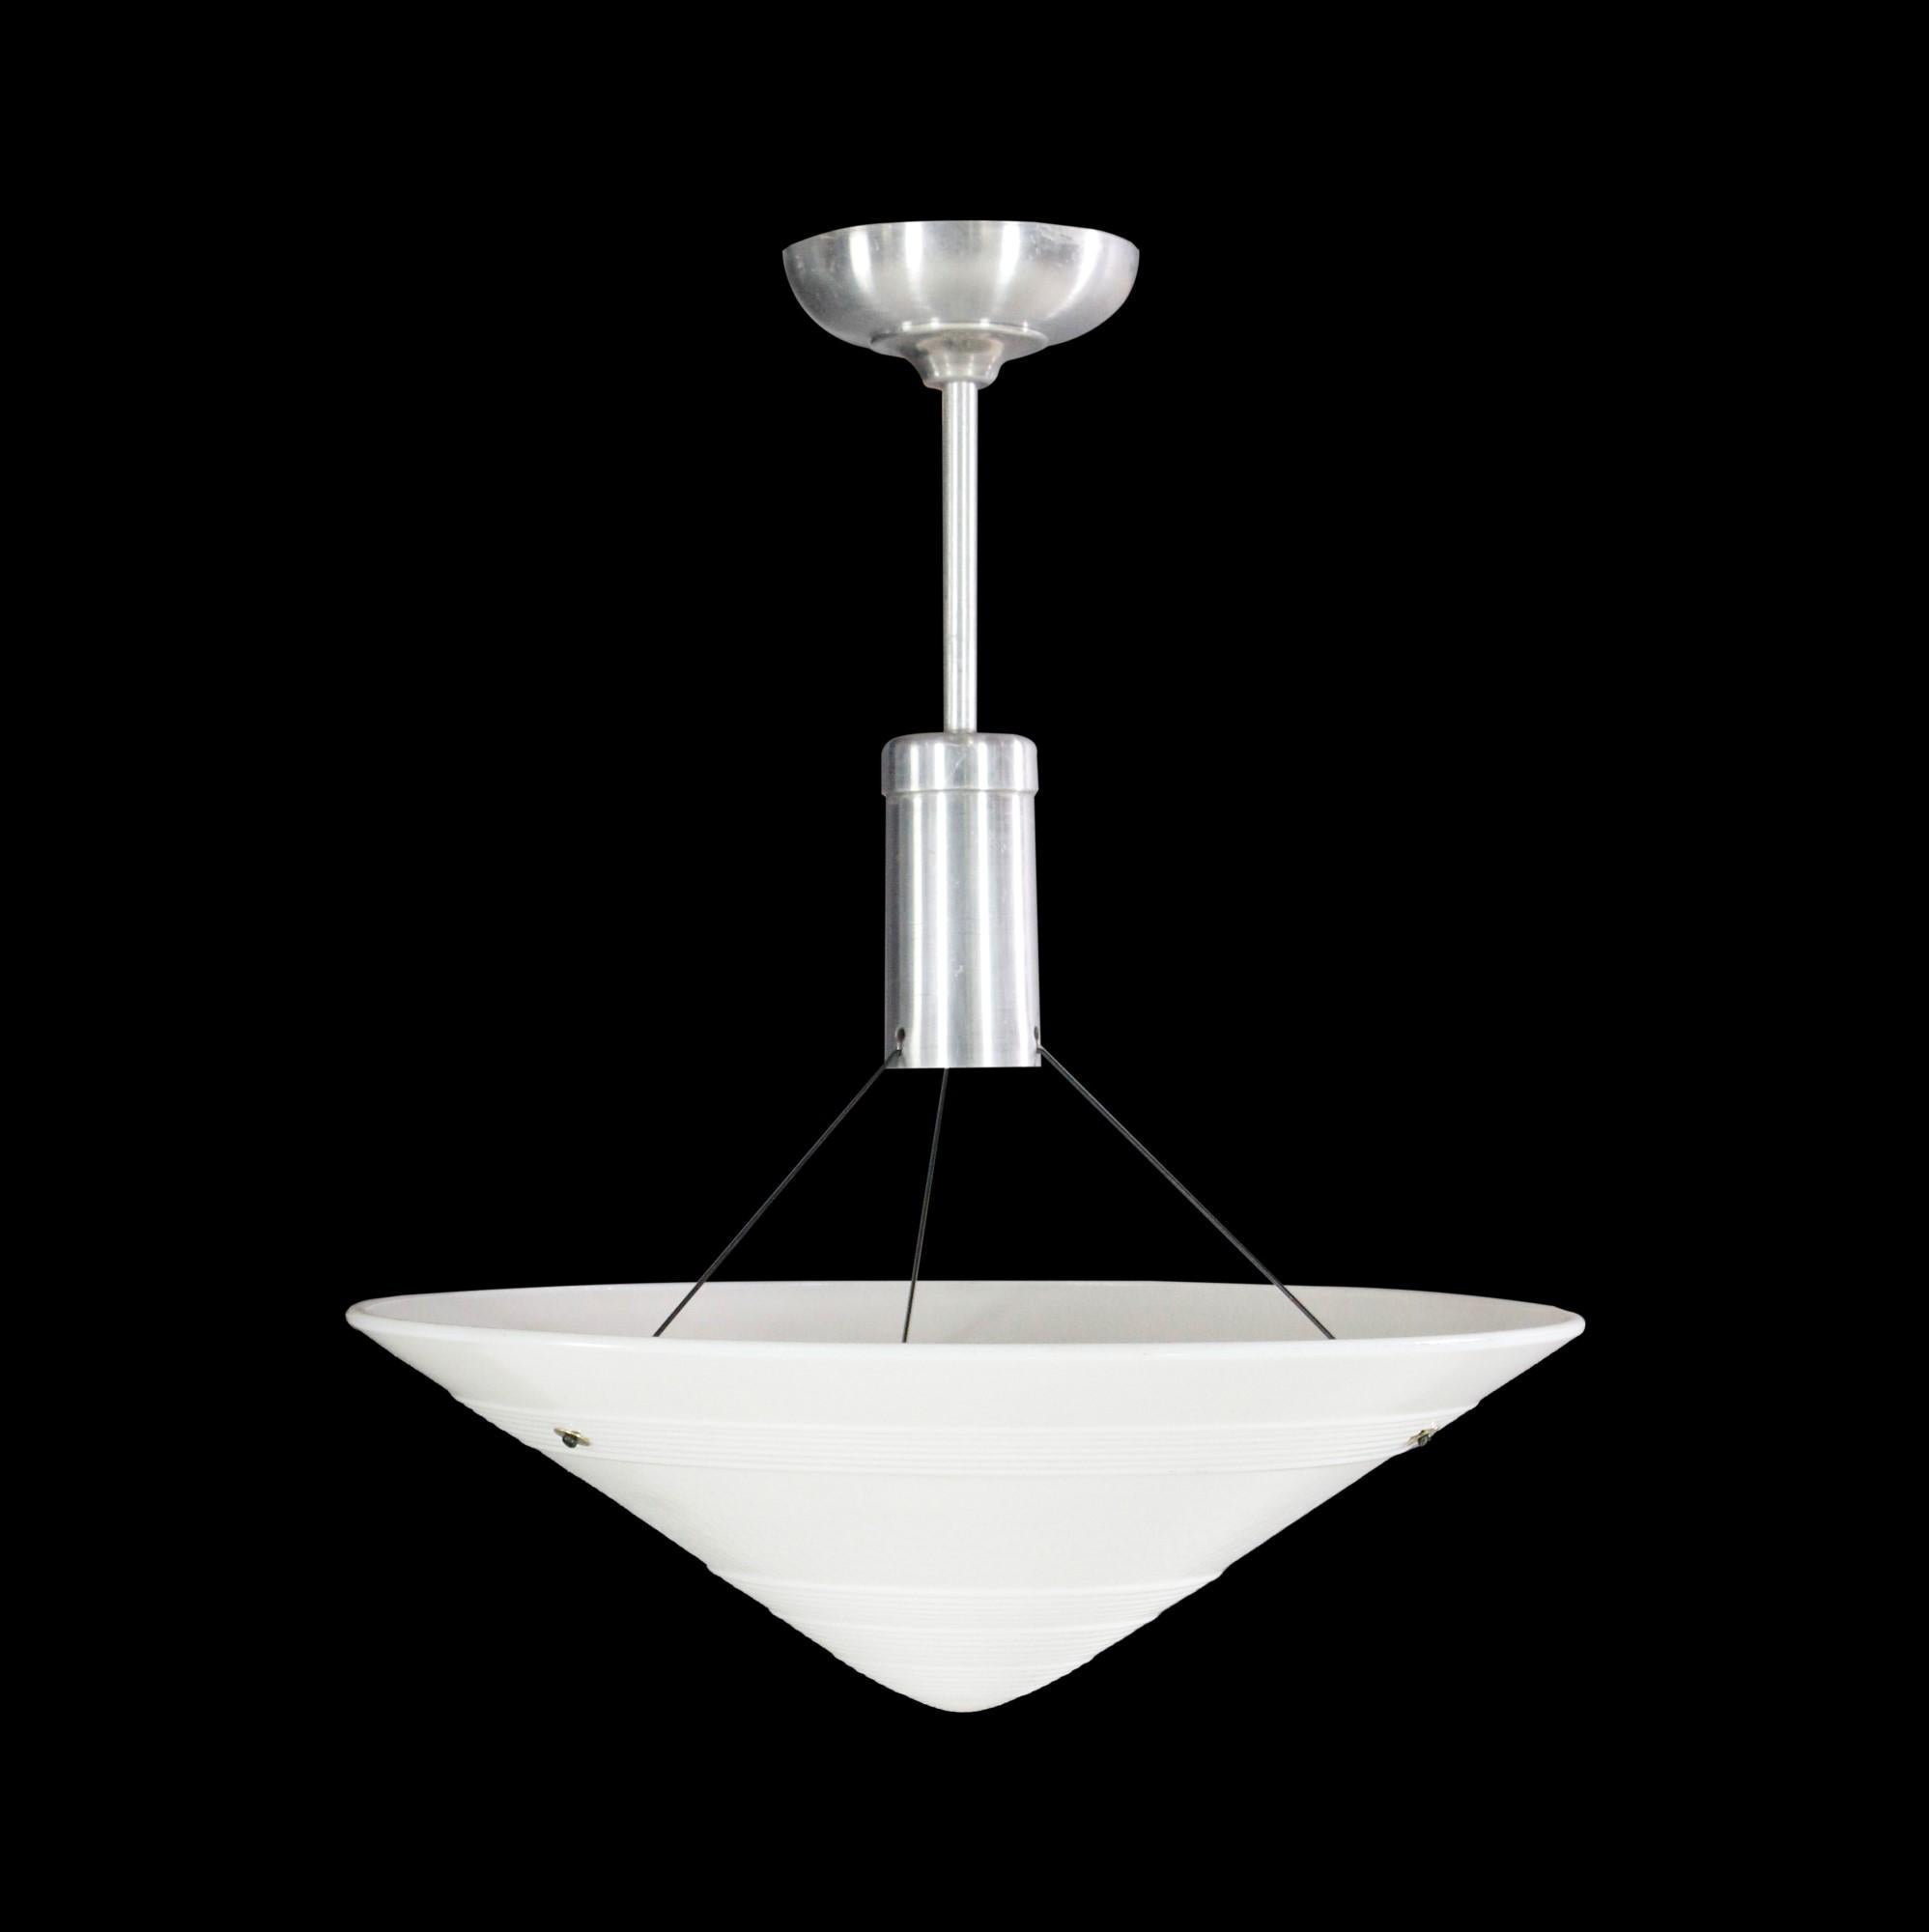 1950s Mid-Century Modern cast glass cone shaped dish pendant light mounted on brushed aluminum hardware. Cleaned and rewired. Small quantity available at time of posting. Priced each. Please inquire. Please note, this item is located in our